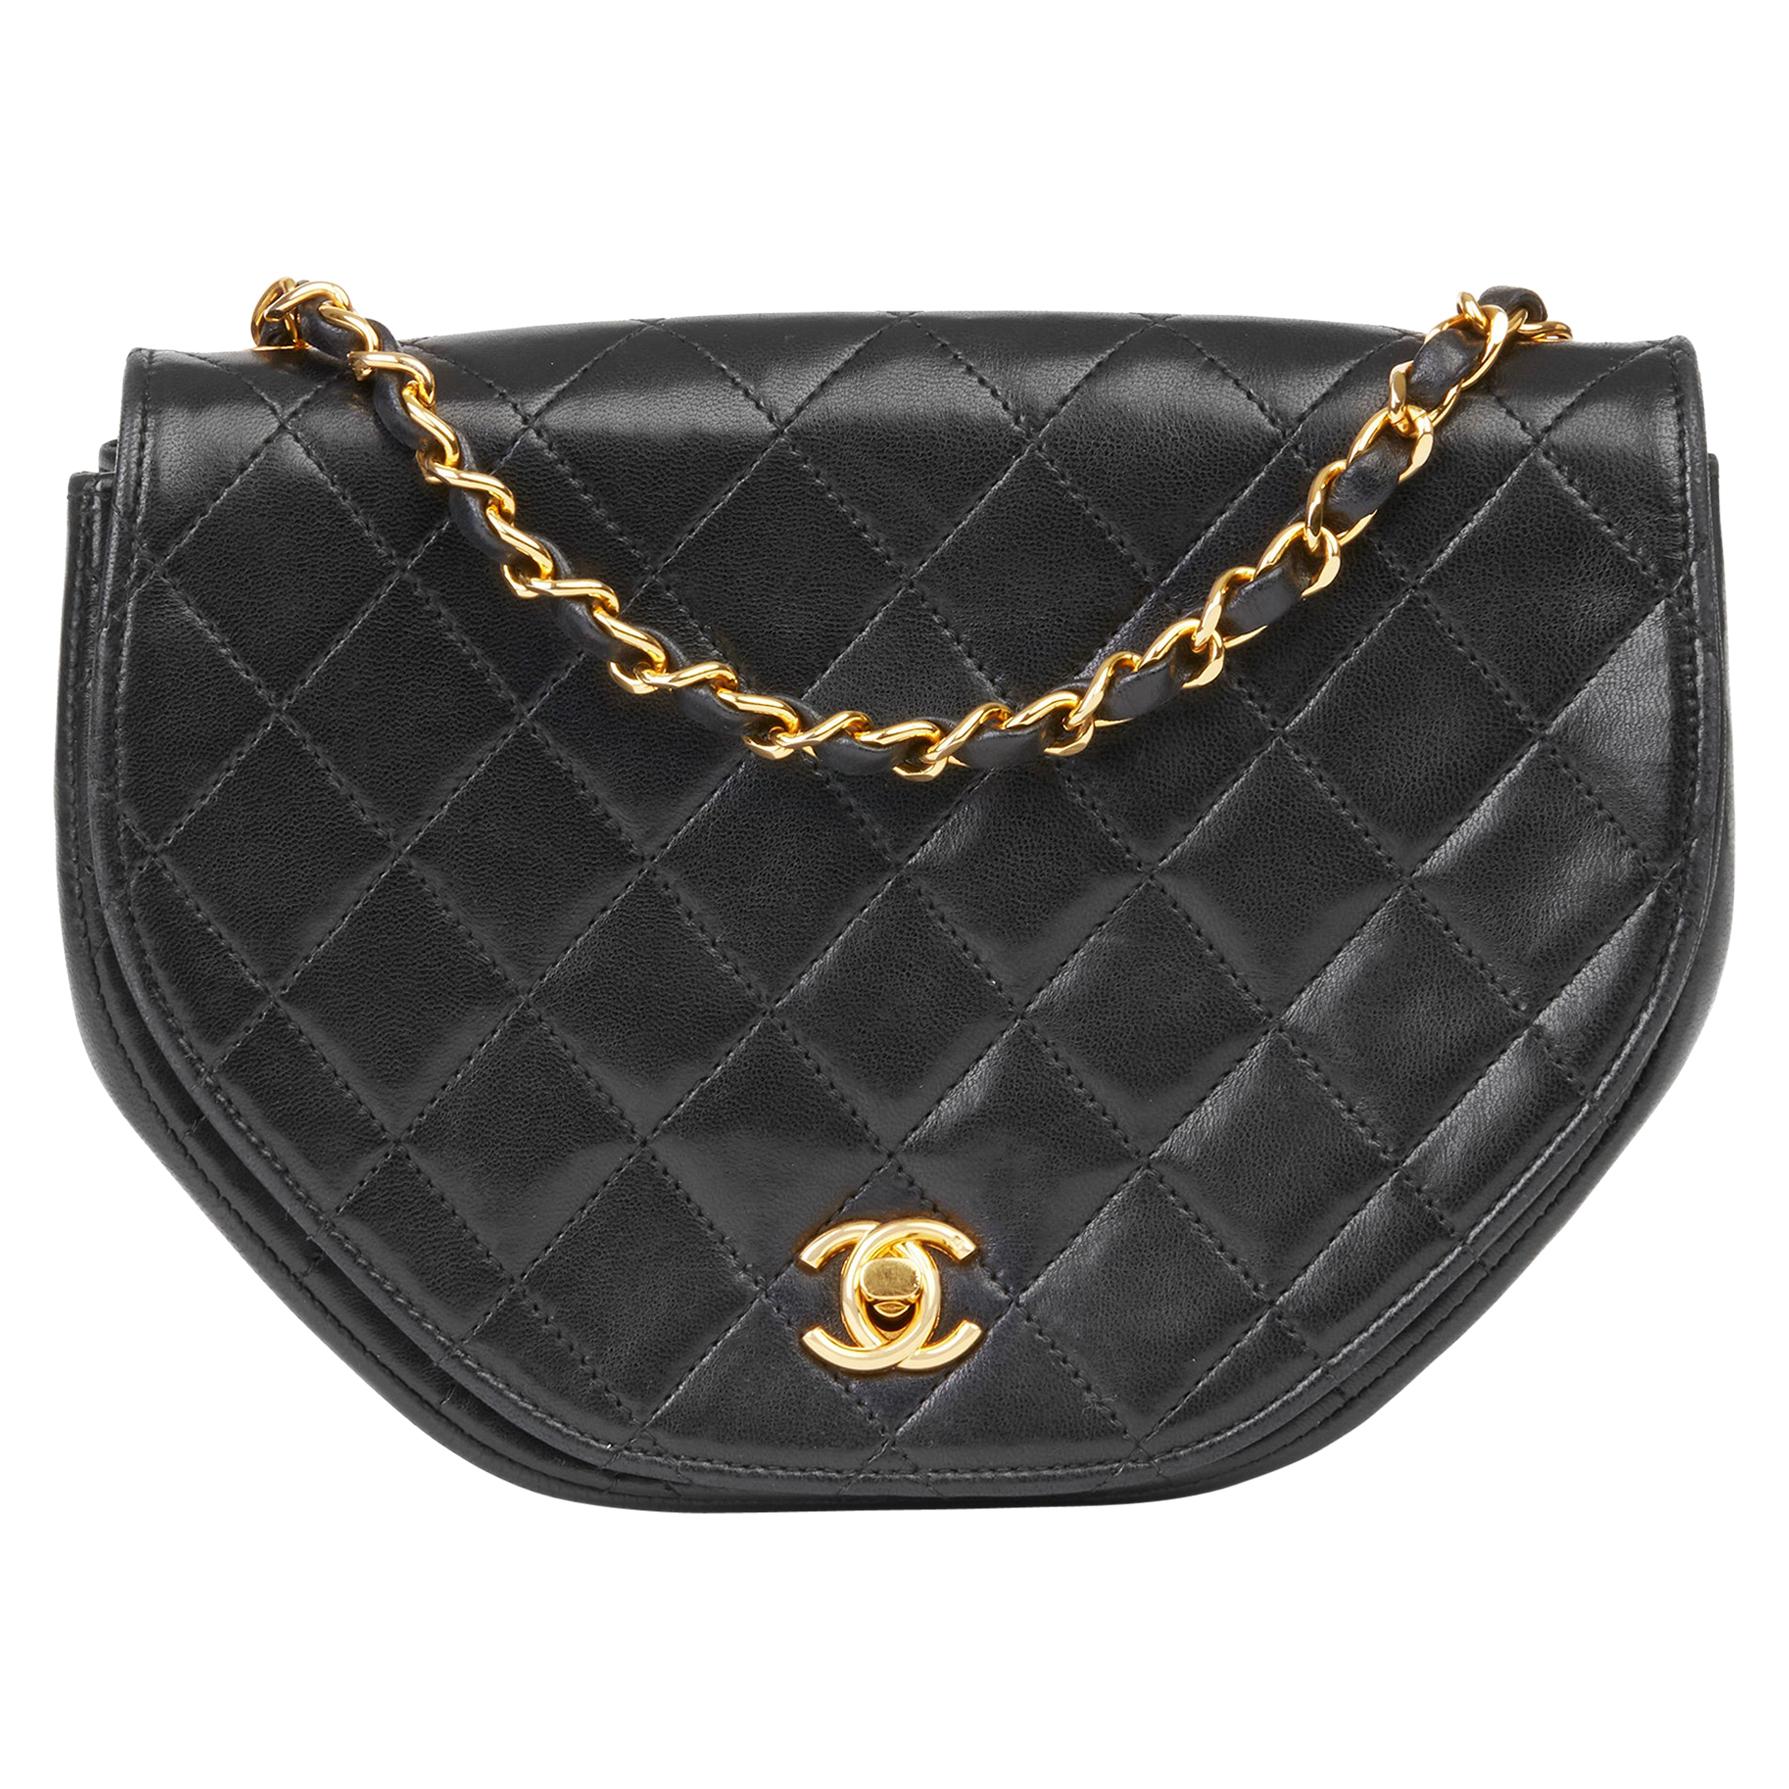 1986 Chanel Black Quilted Lambskin Vintage Classic Round Flap Bag